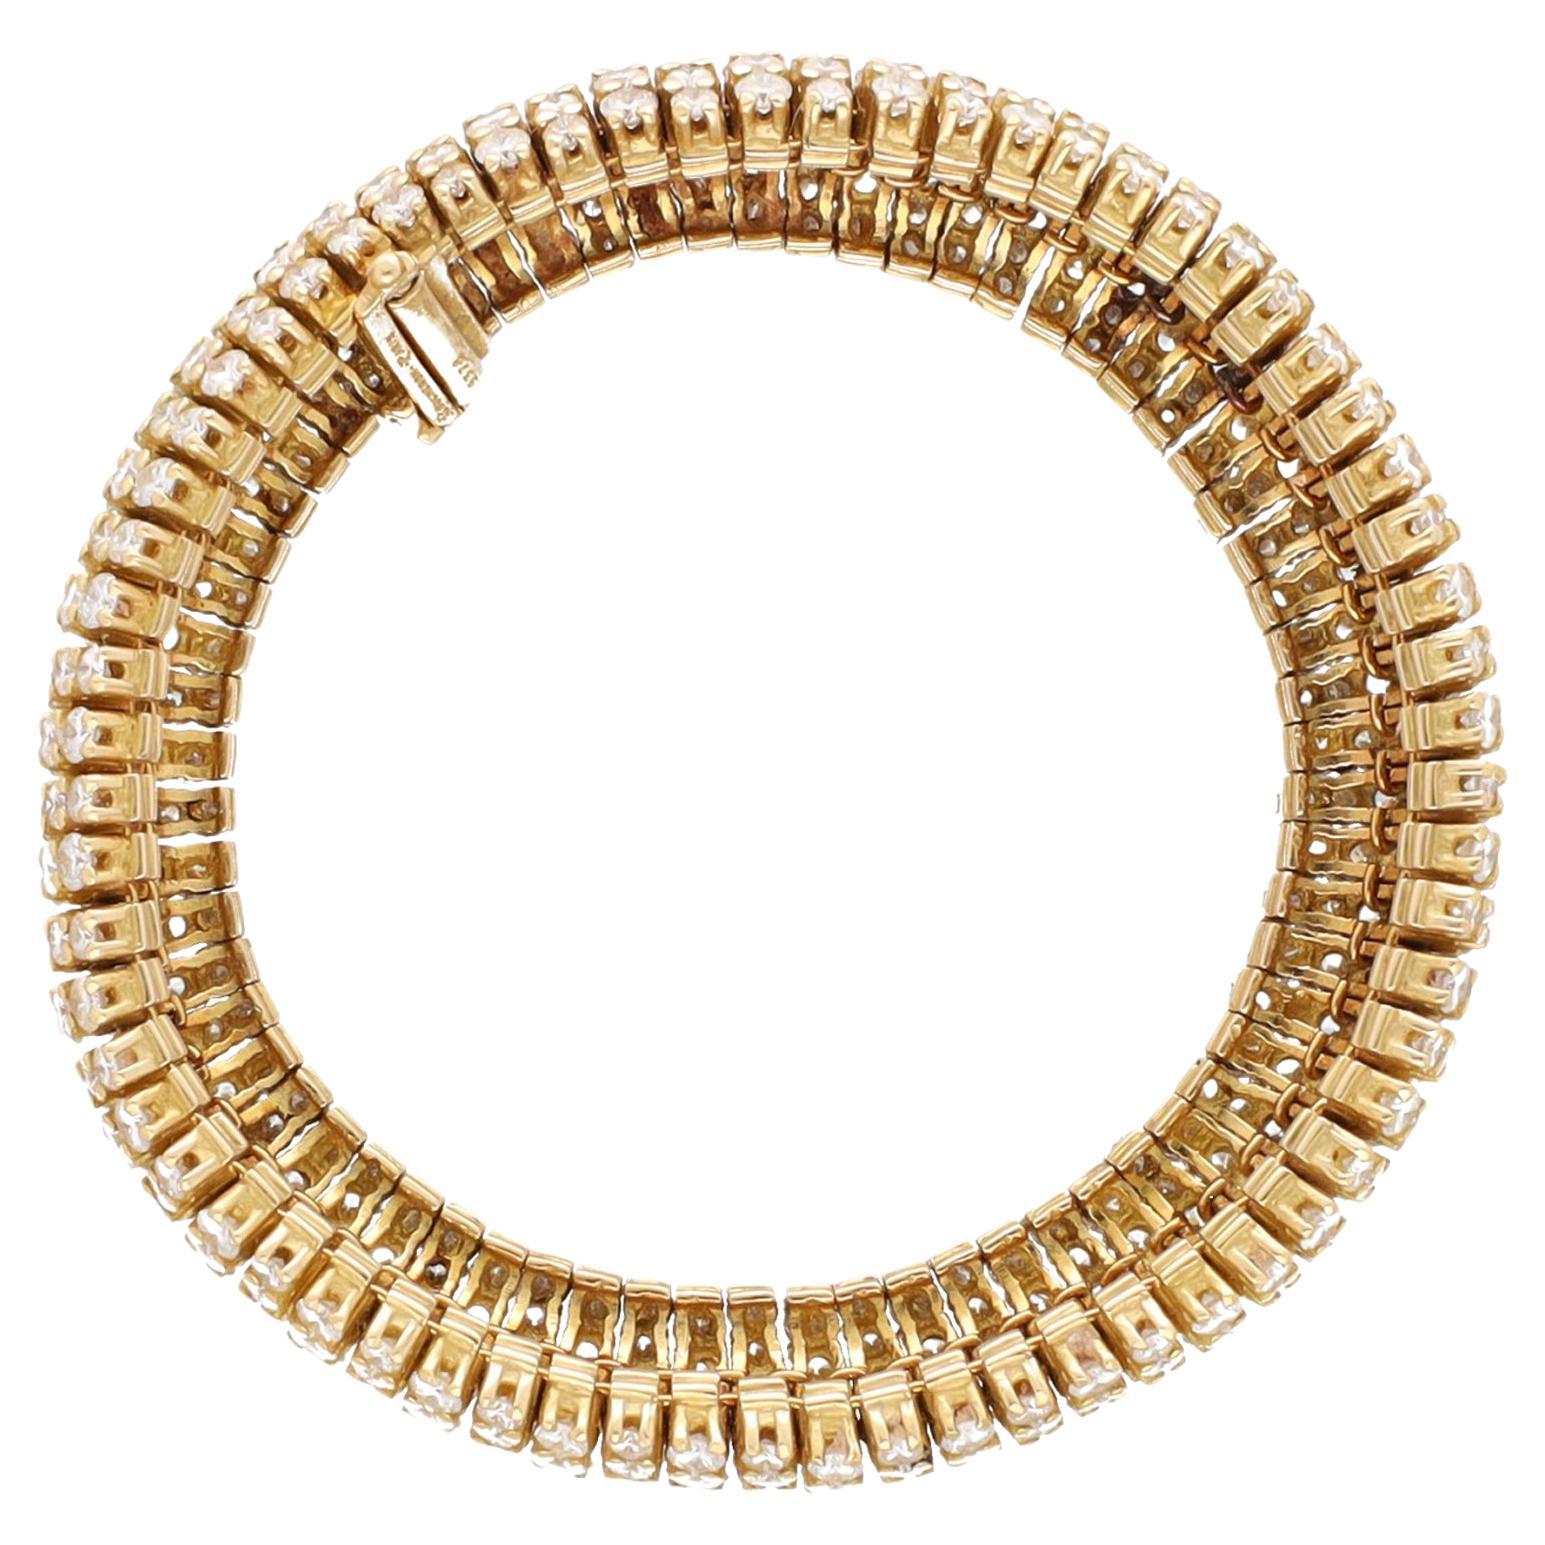 Boucheron Paris 18k Yellow Gold, Diamond Bracelet In Excellent Condition For Sale In New York, NY